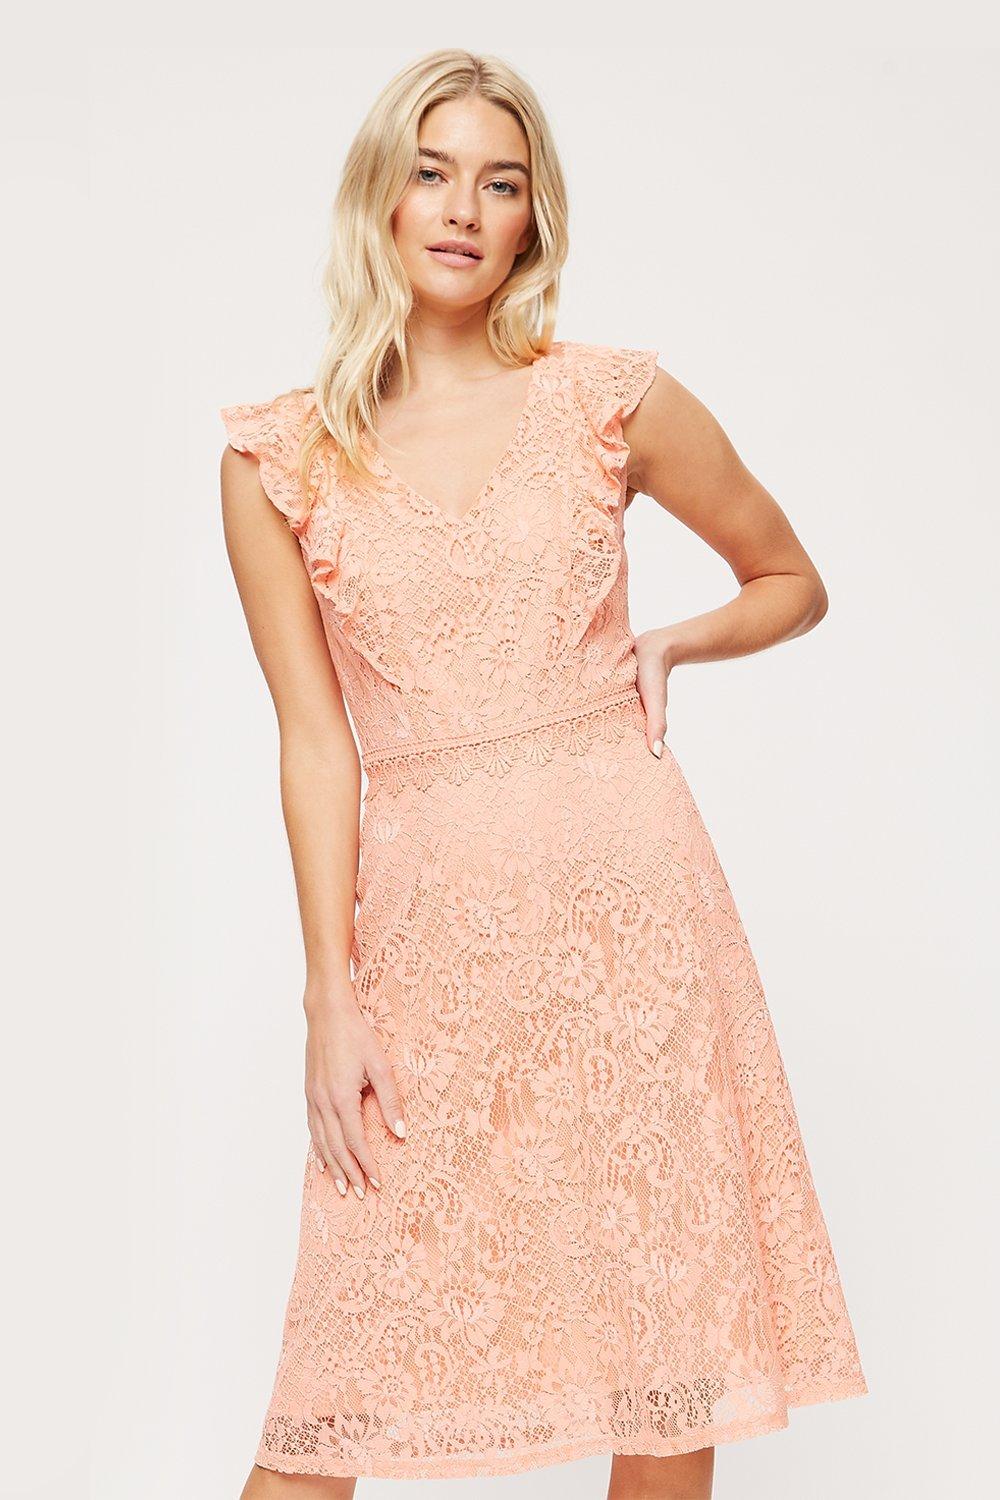 Dorothy Perkins special occasion dresses